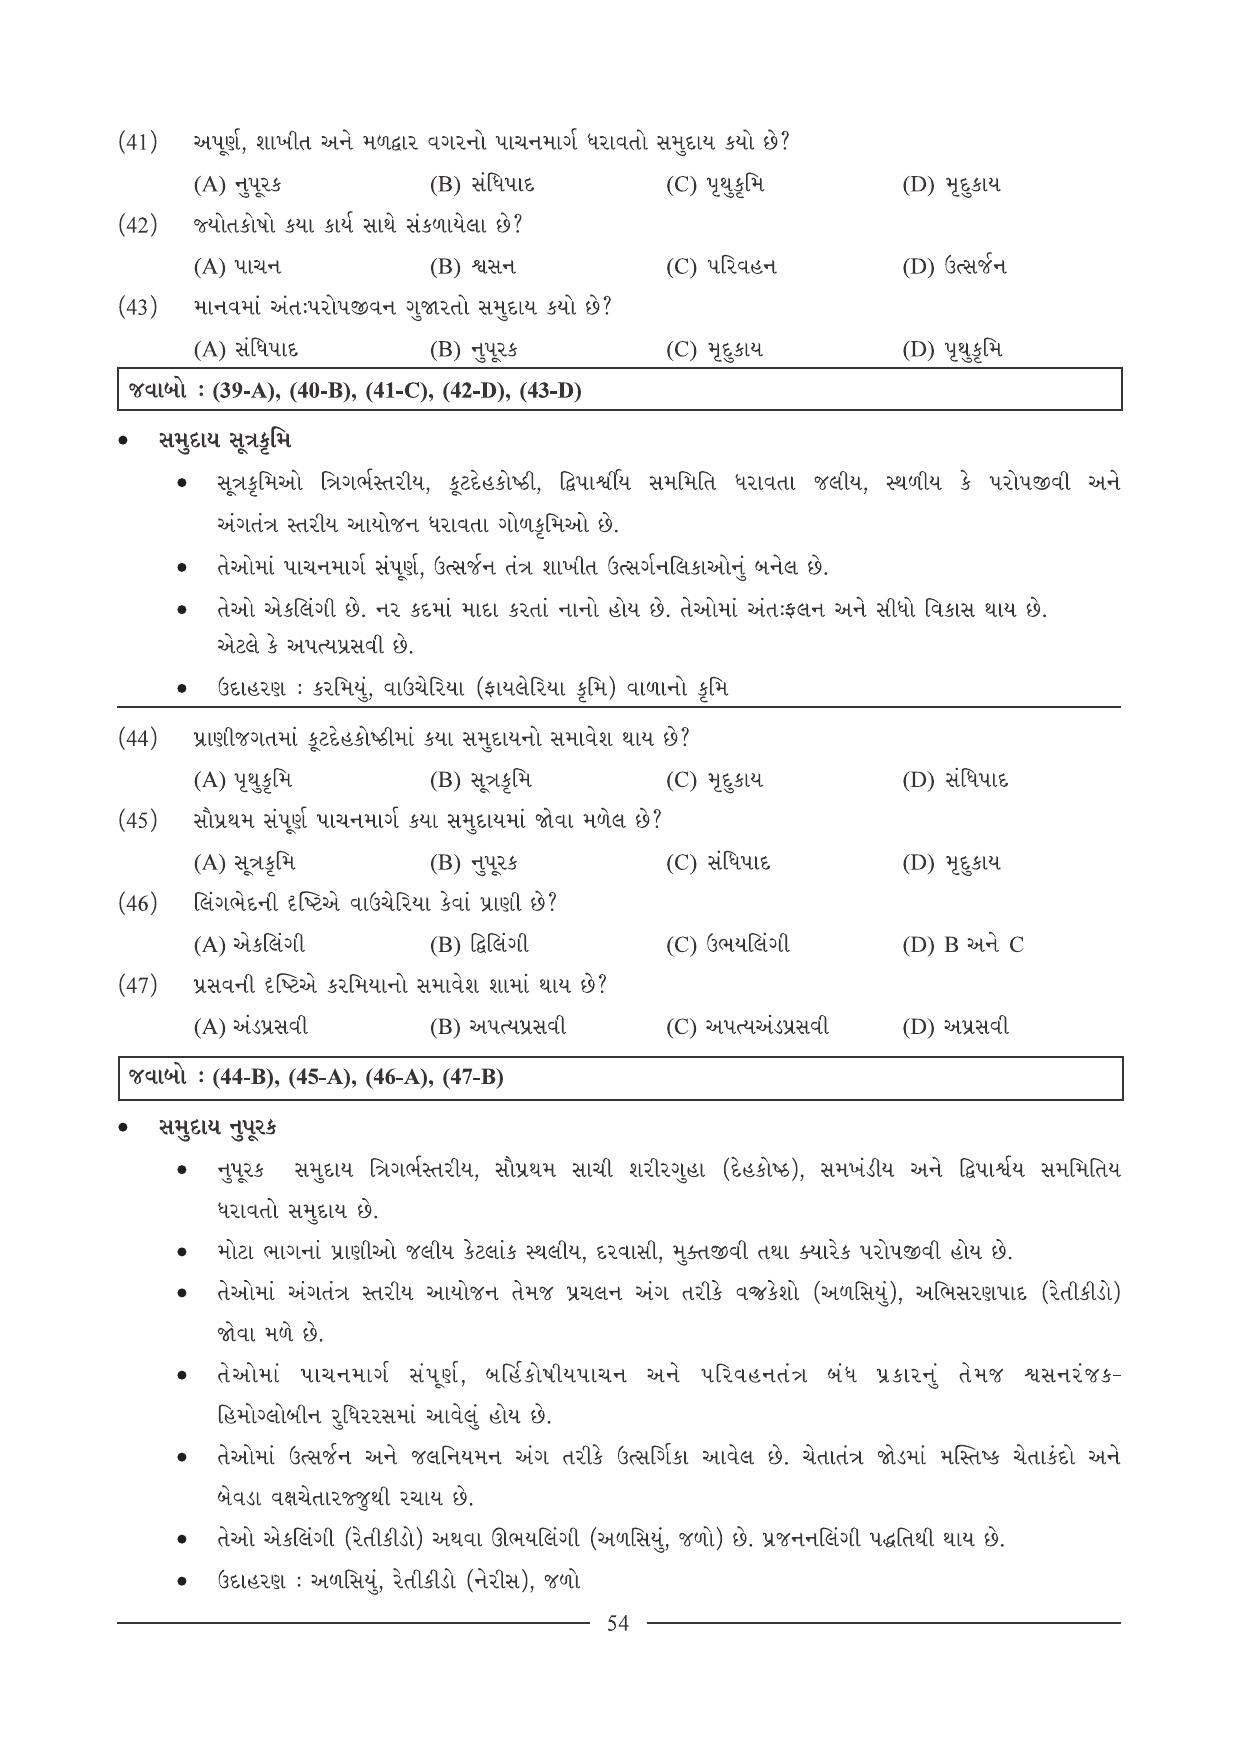 GSEB HSC Biology Question Paper (Gujarati Medium)- Chapter 4 - Page 7